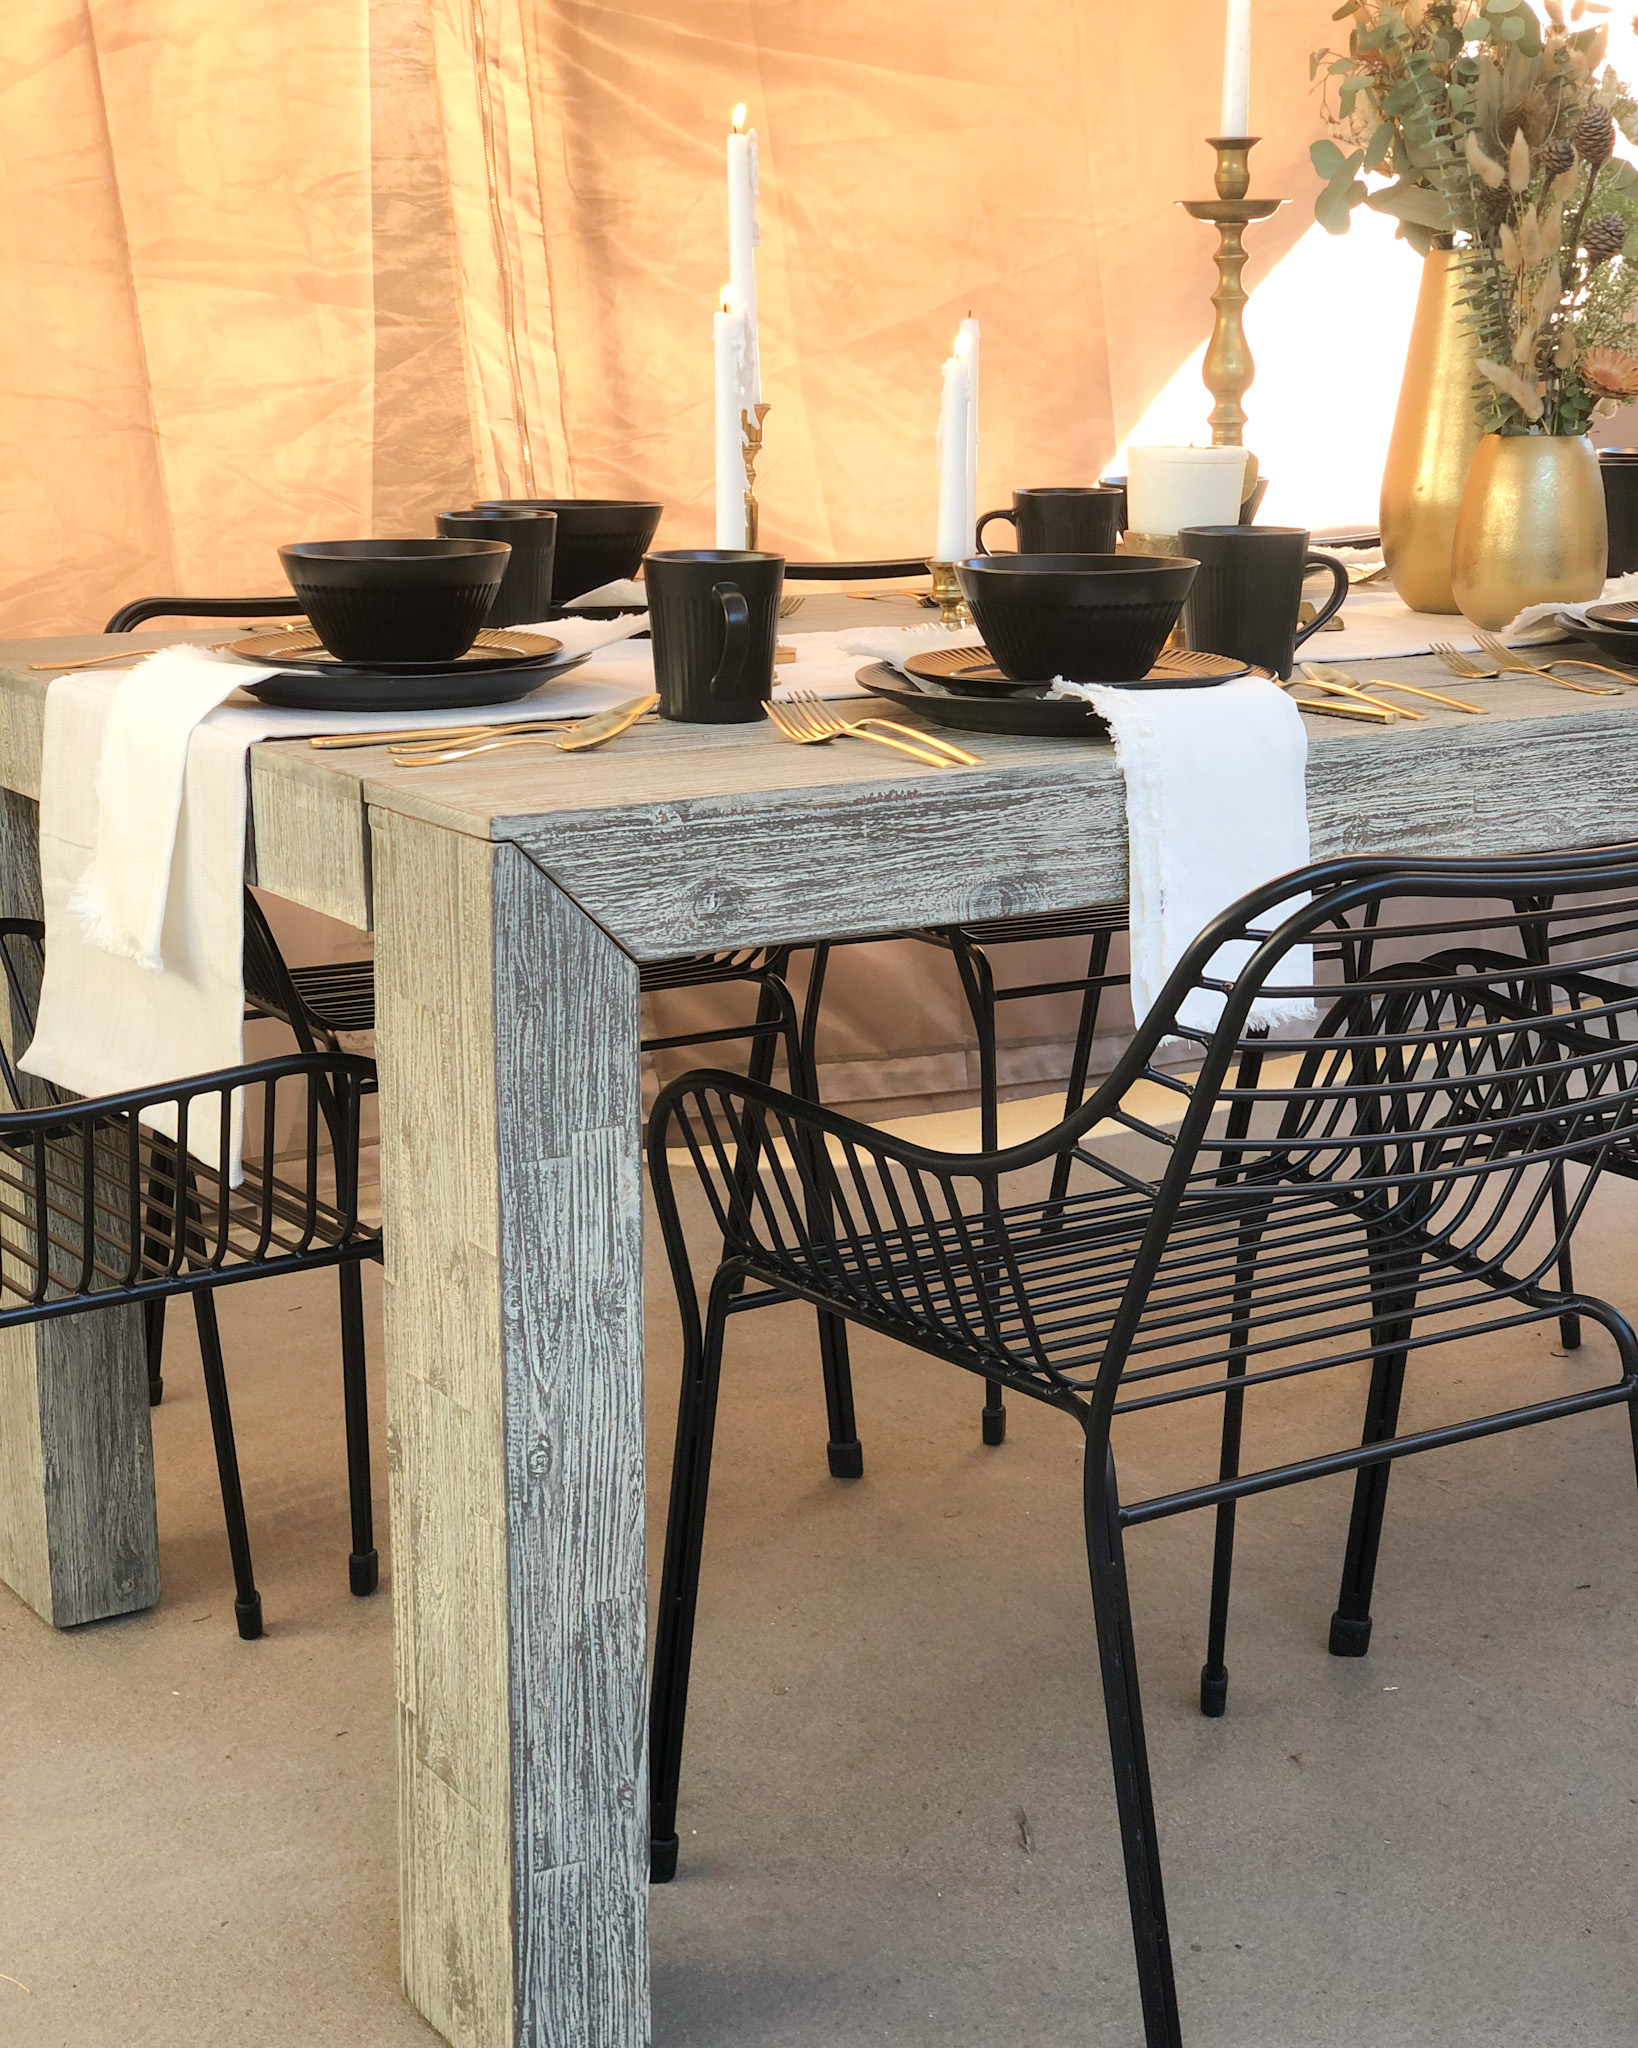 Ajai Gave Her Parent'S Patio A Major Facelift Just In Time For Thanksgiving (And Her Due Date)